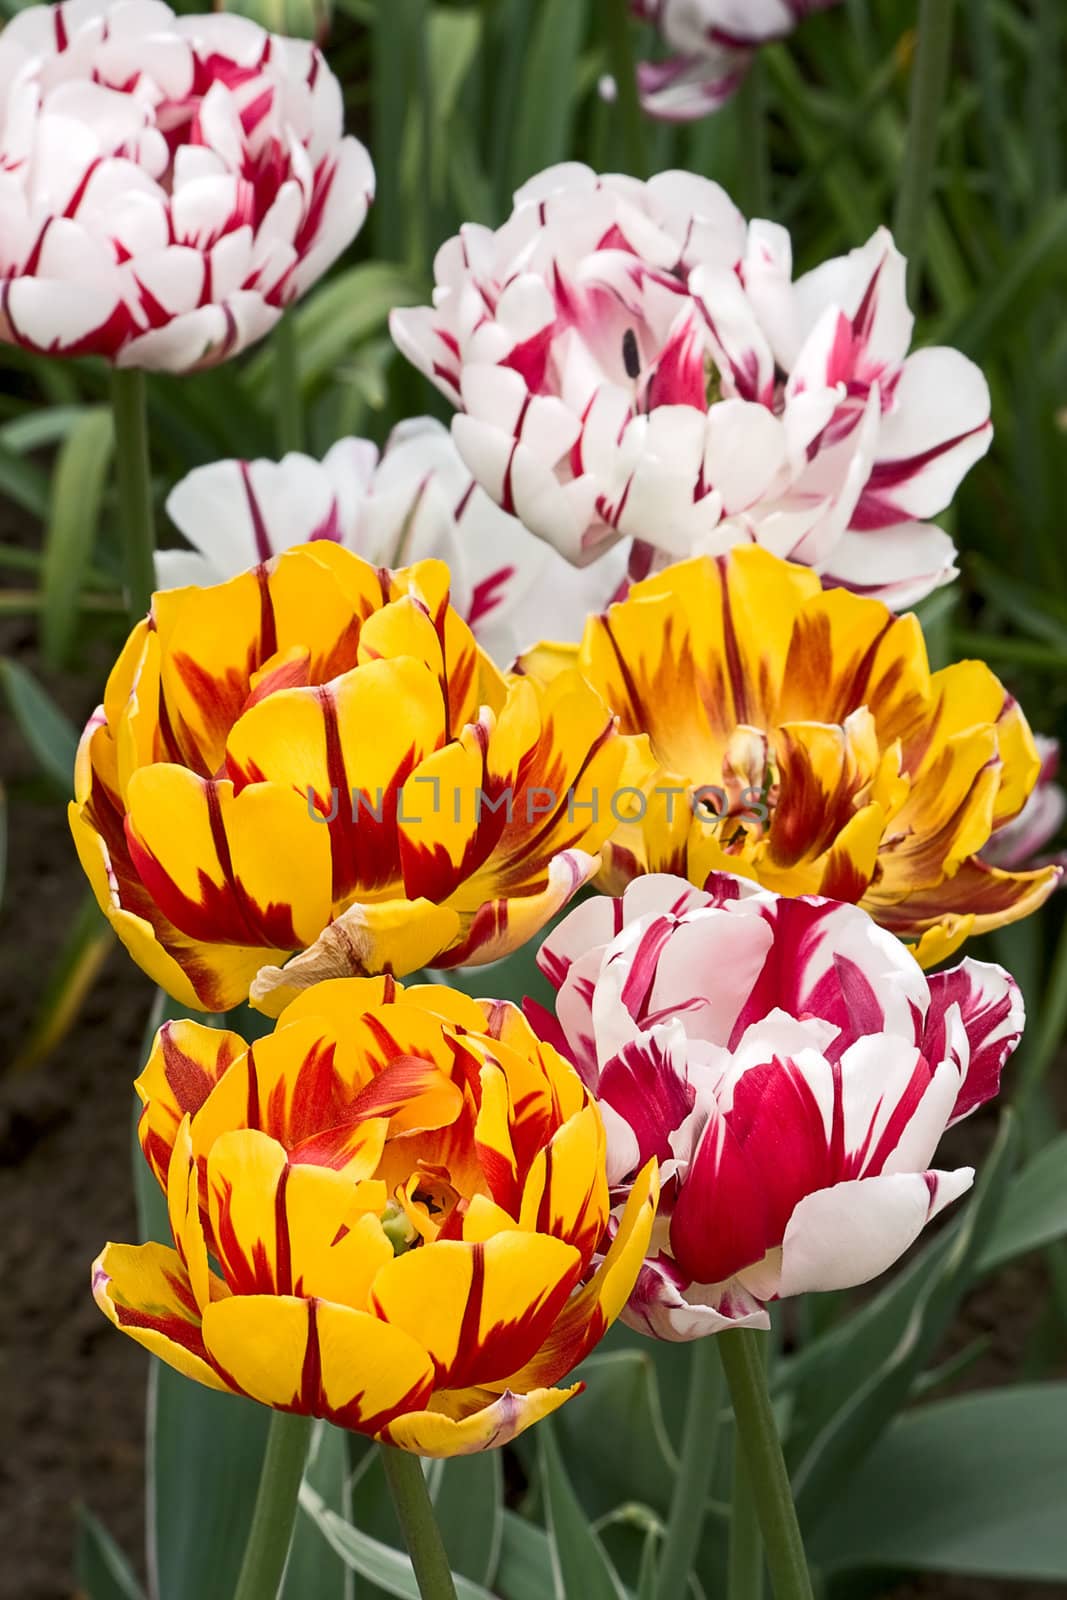 Set of tulips of different forms of flowers and colors . Image with shallow depth of field.